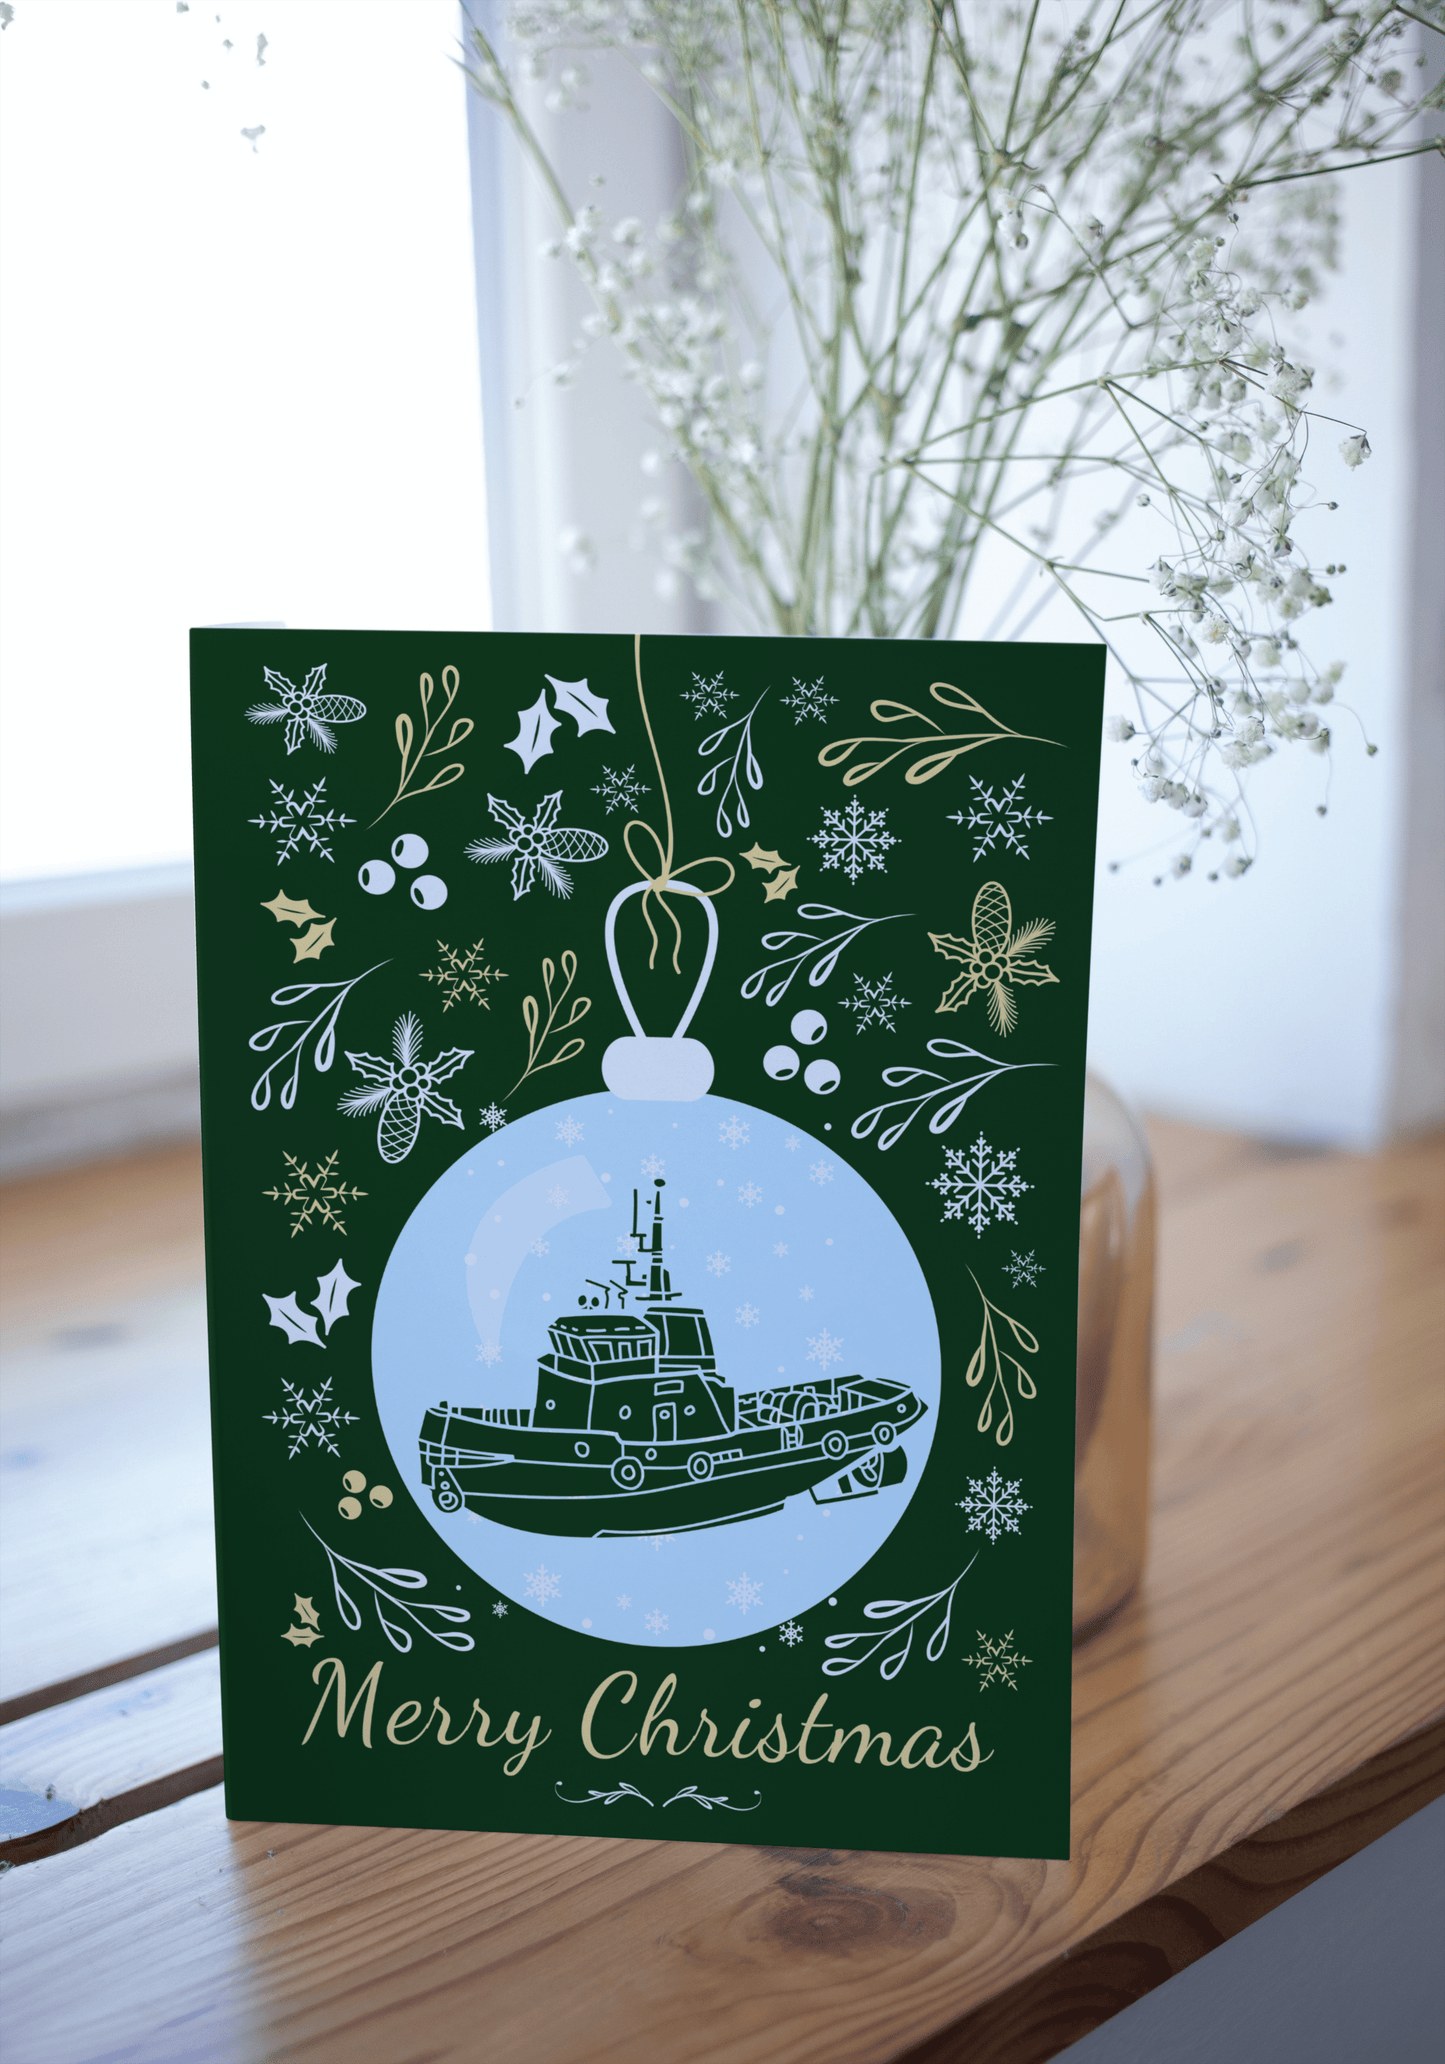 Nautical Christmas card (tugboat) Great Harbour Gifts